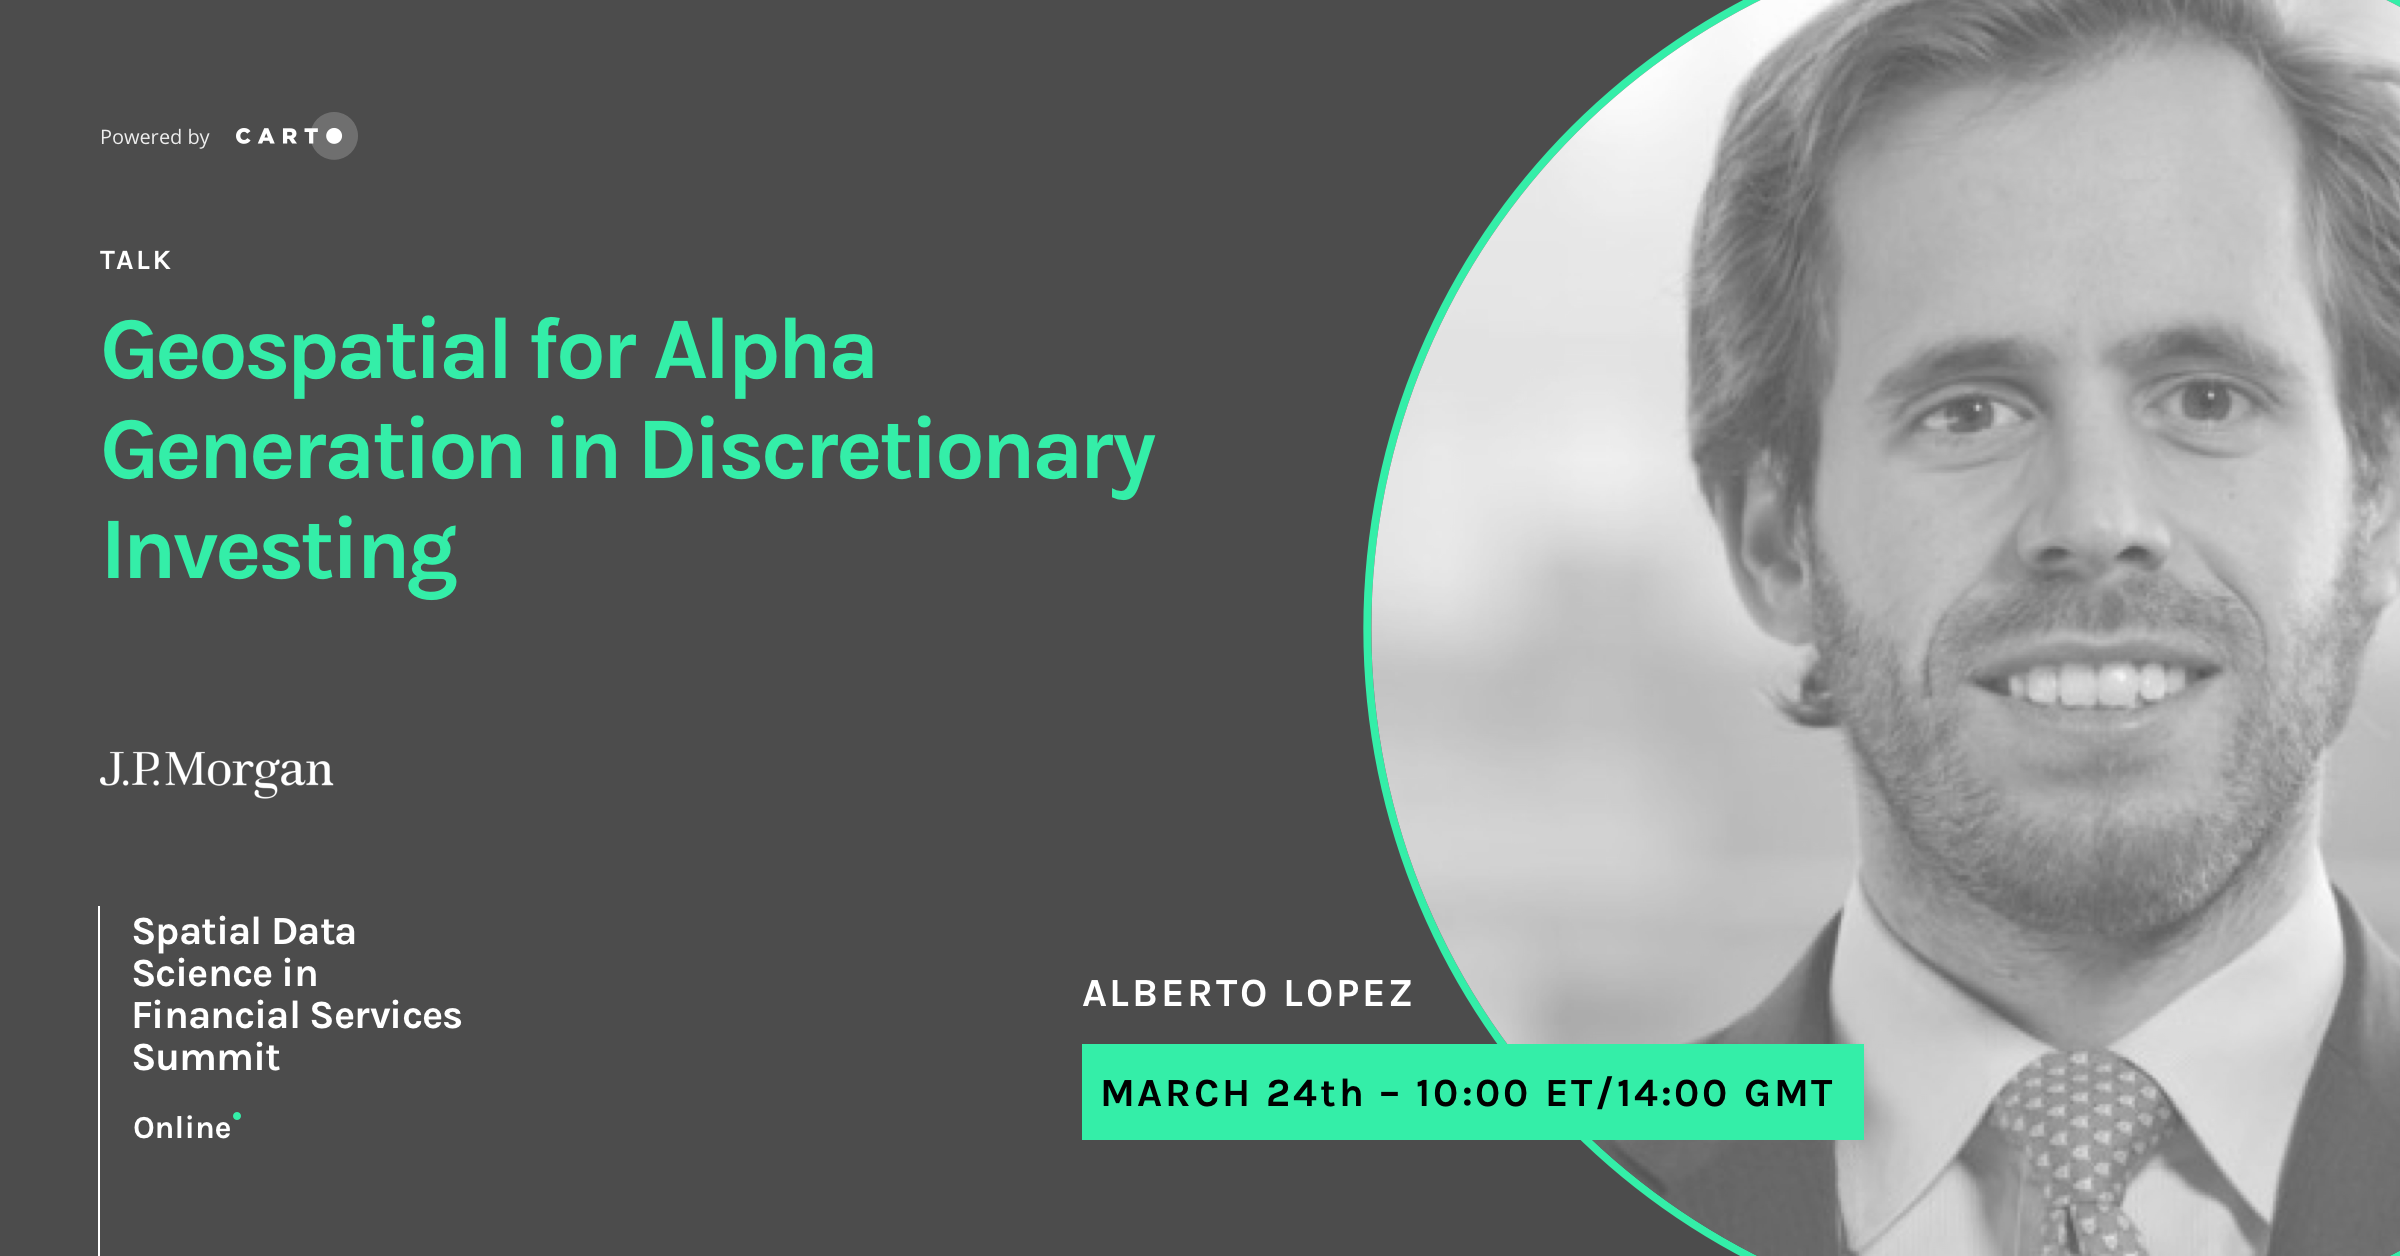 Geospatial for Alpha Generation in Discretionary Investing